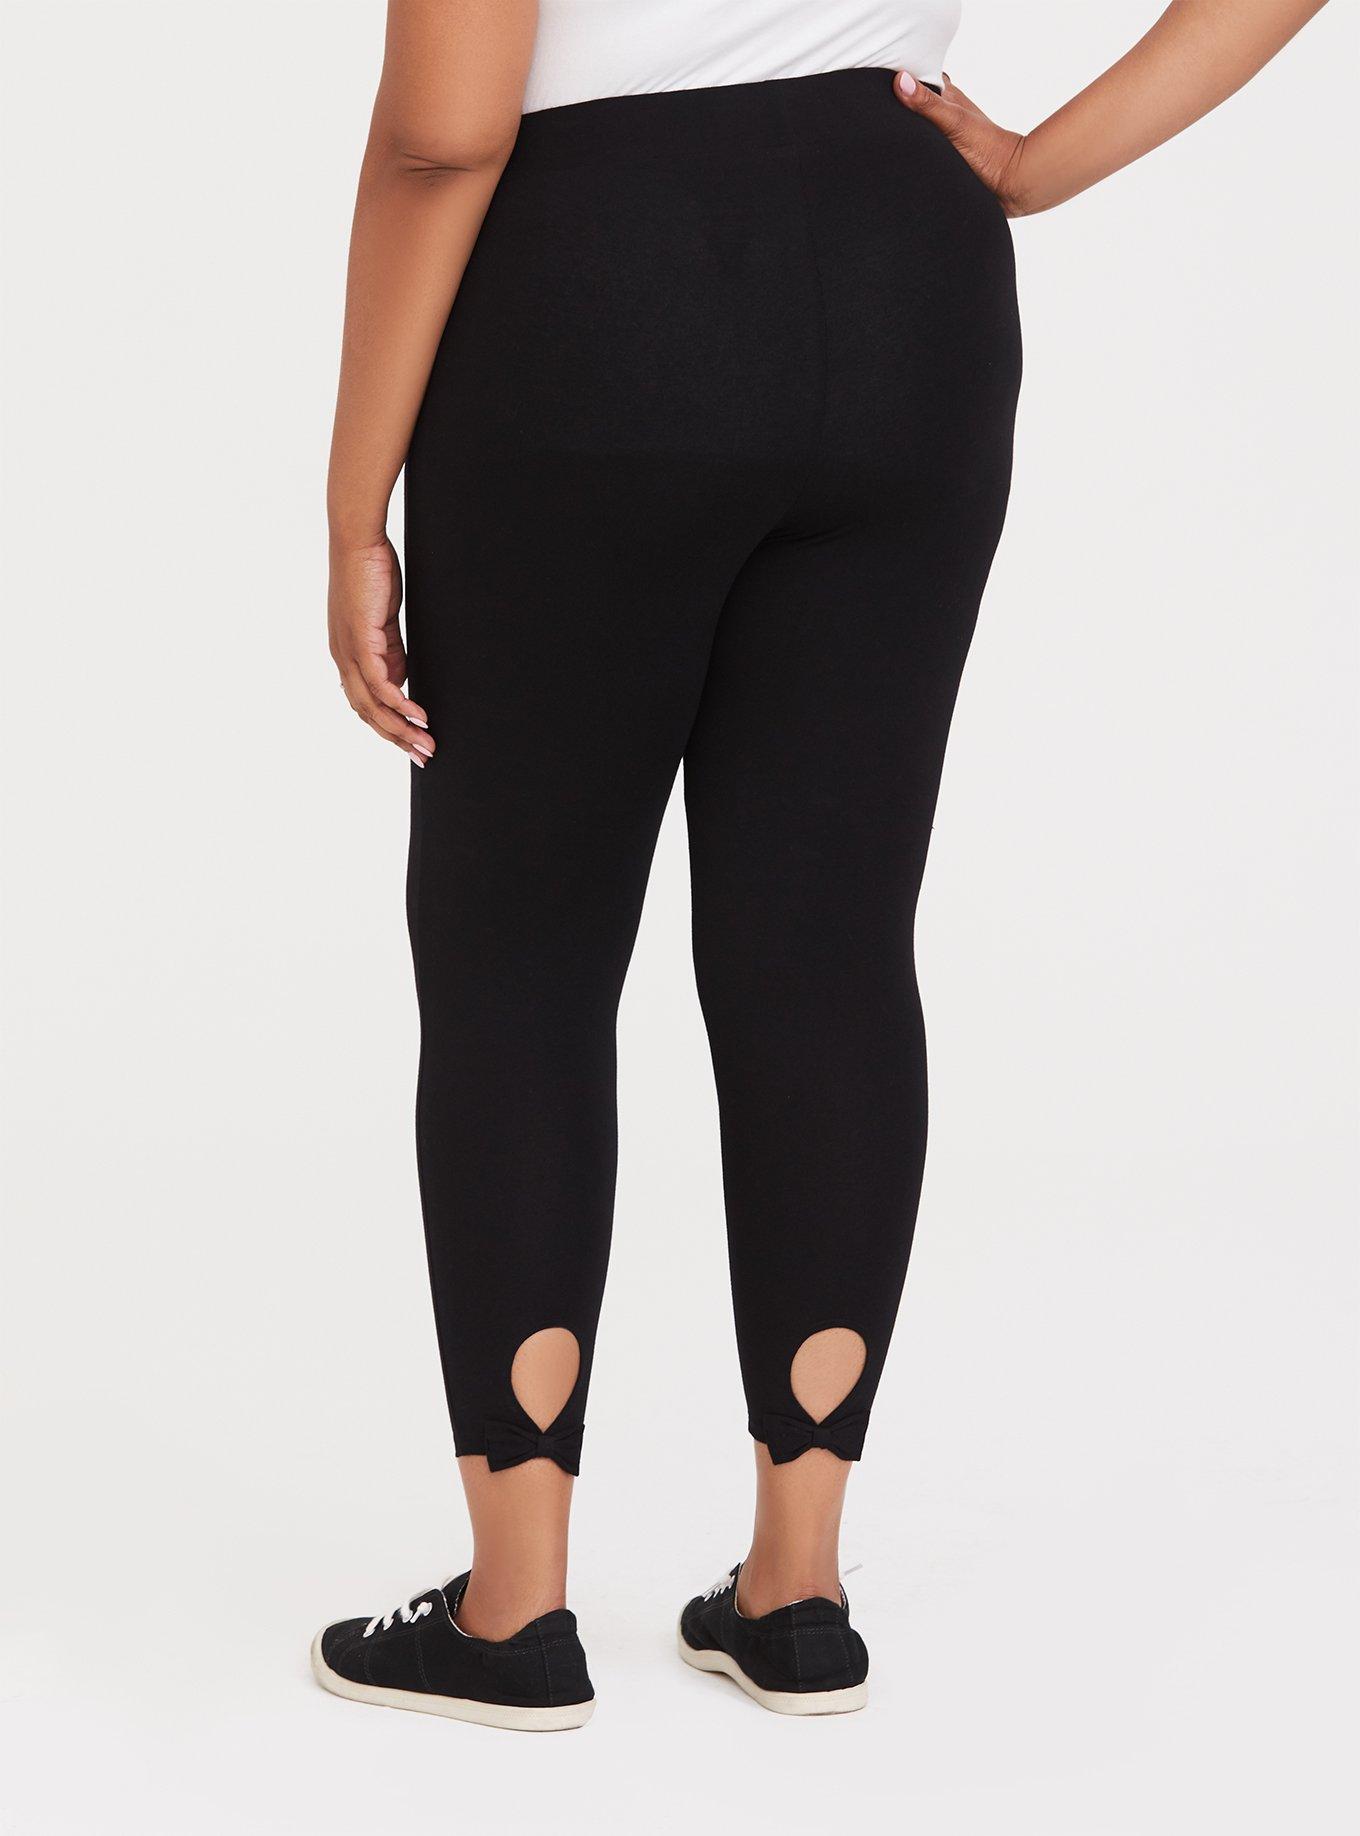 Black Bow Cut Leggings by Pushbutton on Sale